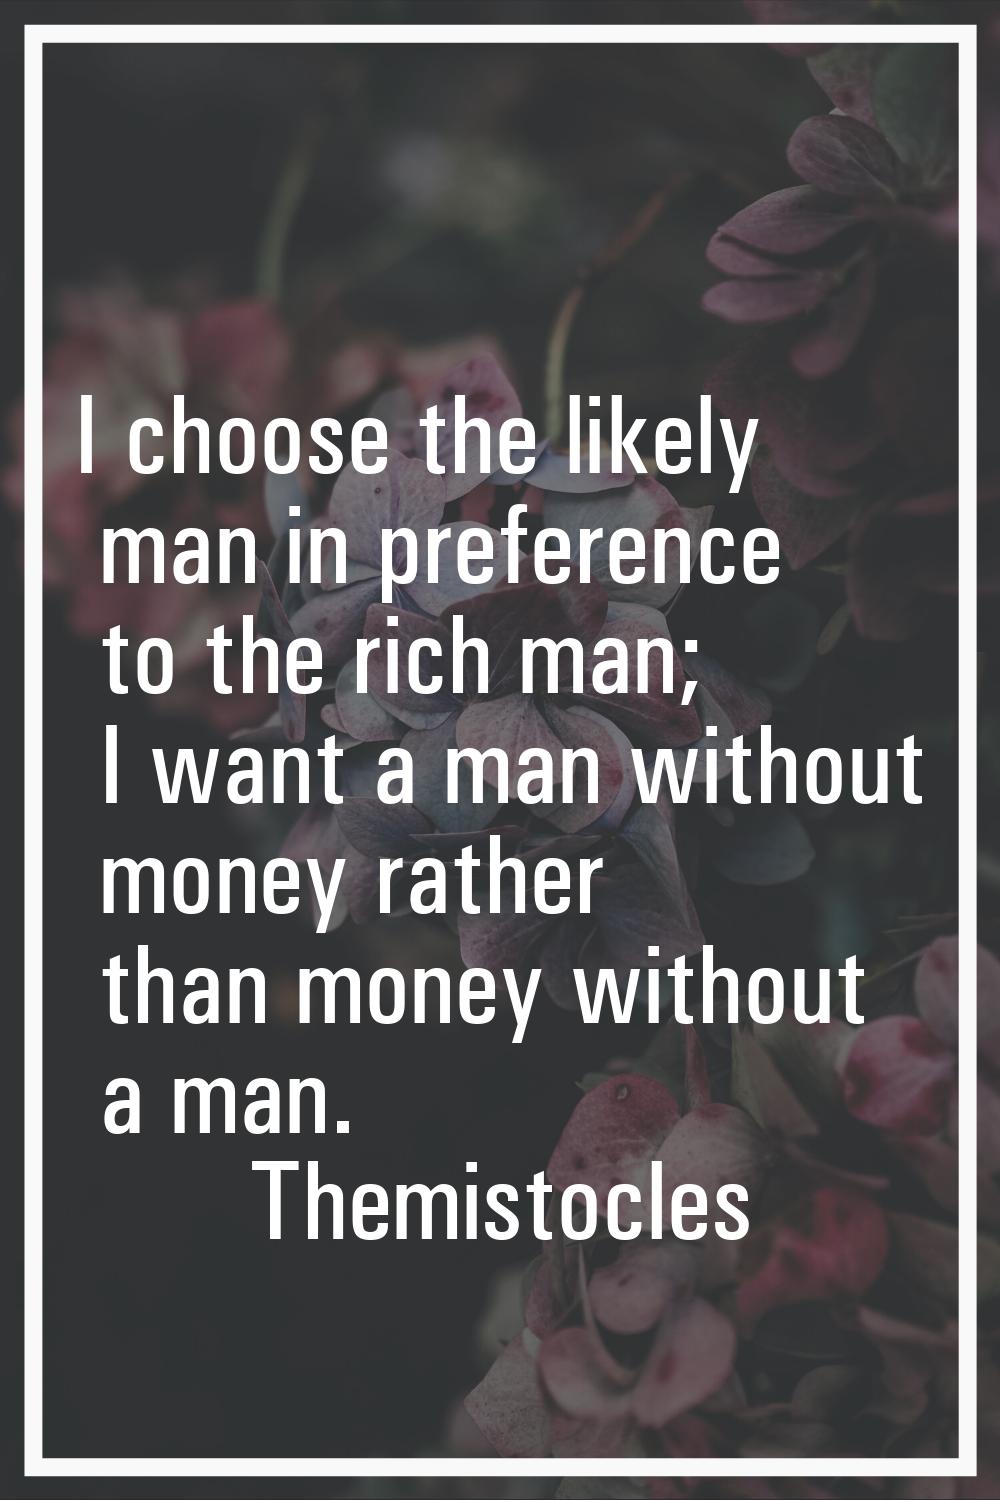 I choose the likely man in preference to the rich man; I want a man without money rather than money